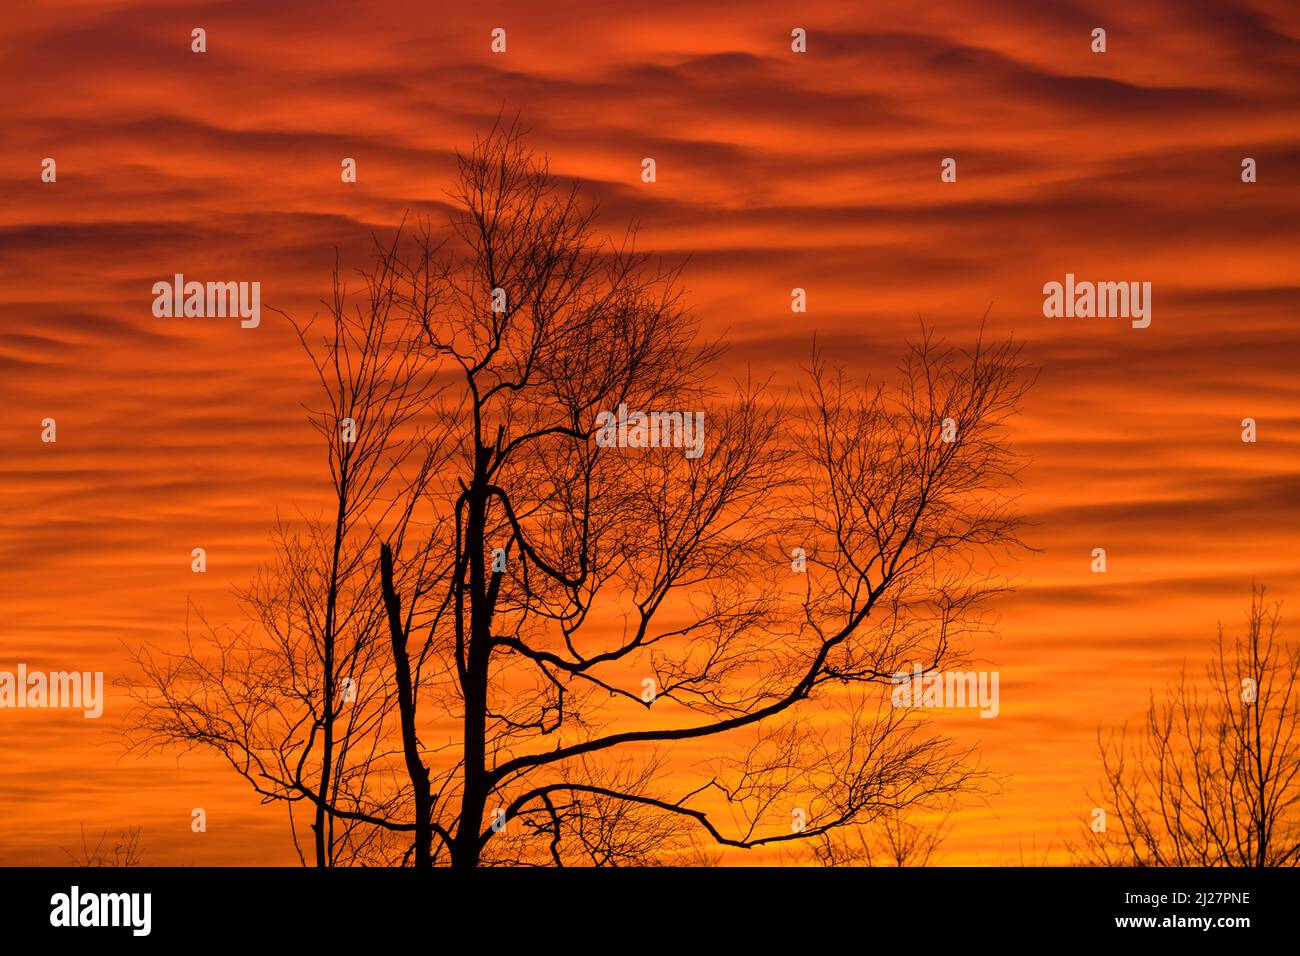 sahara dust in evening clouds with tree silhouettes Stock Photo